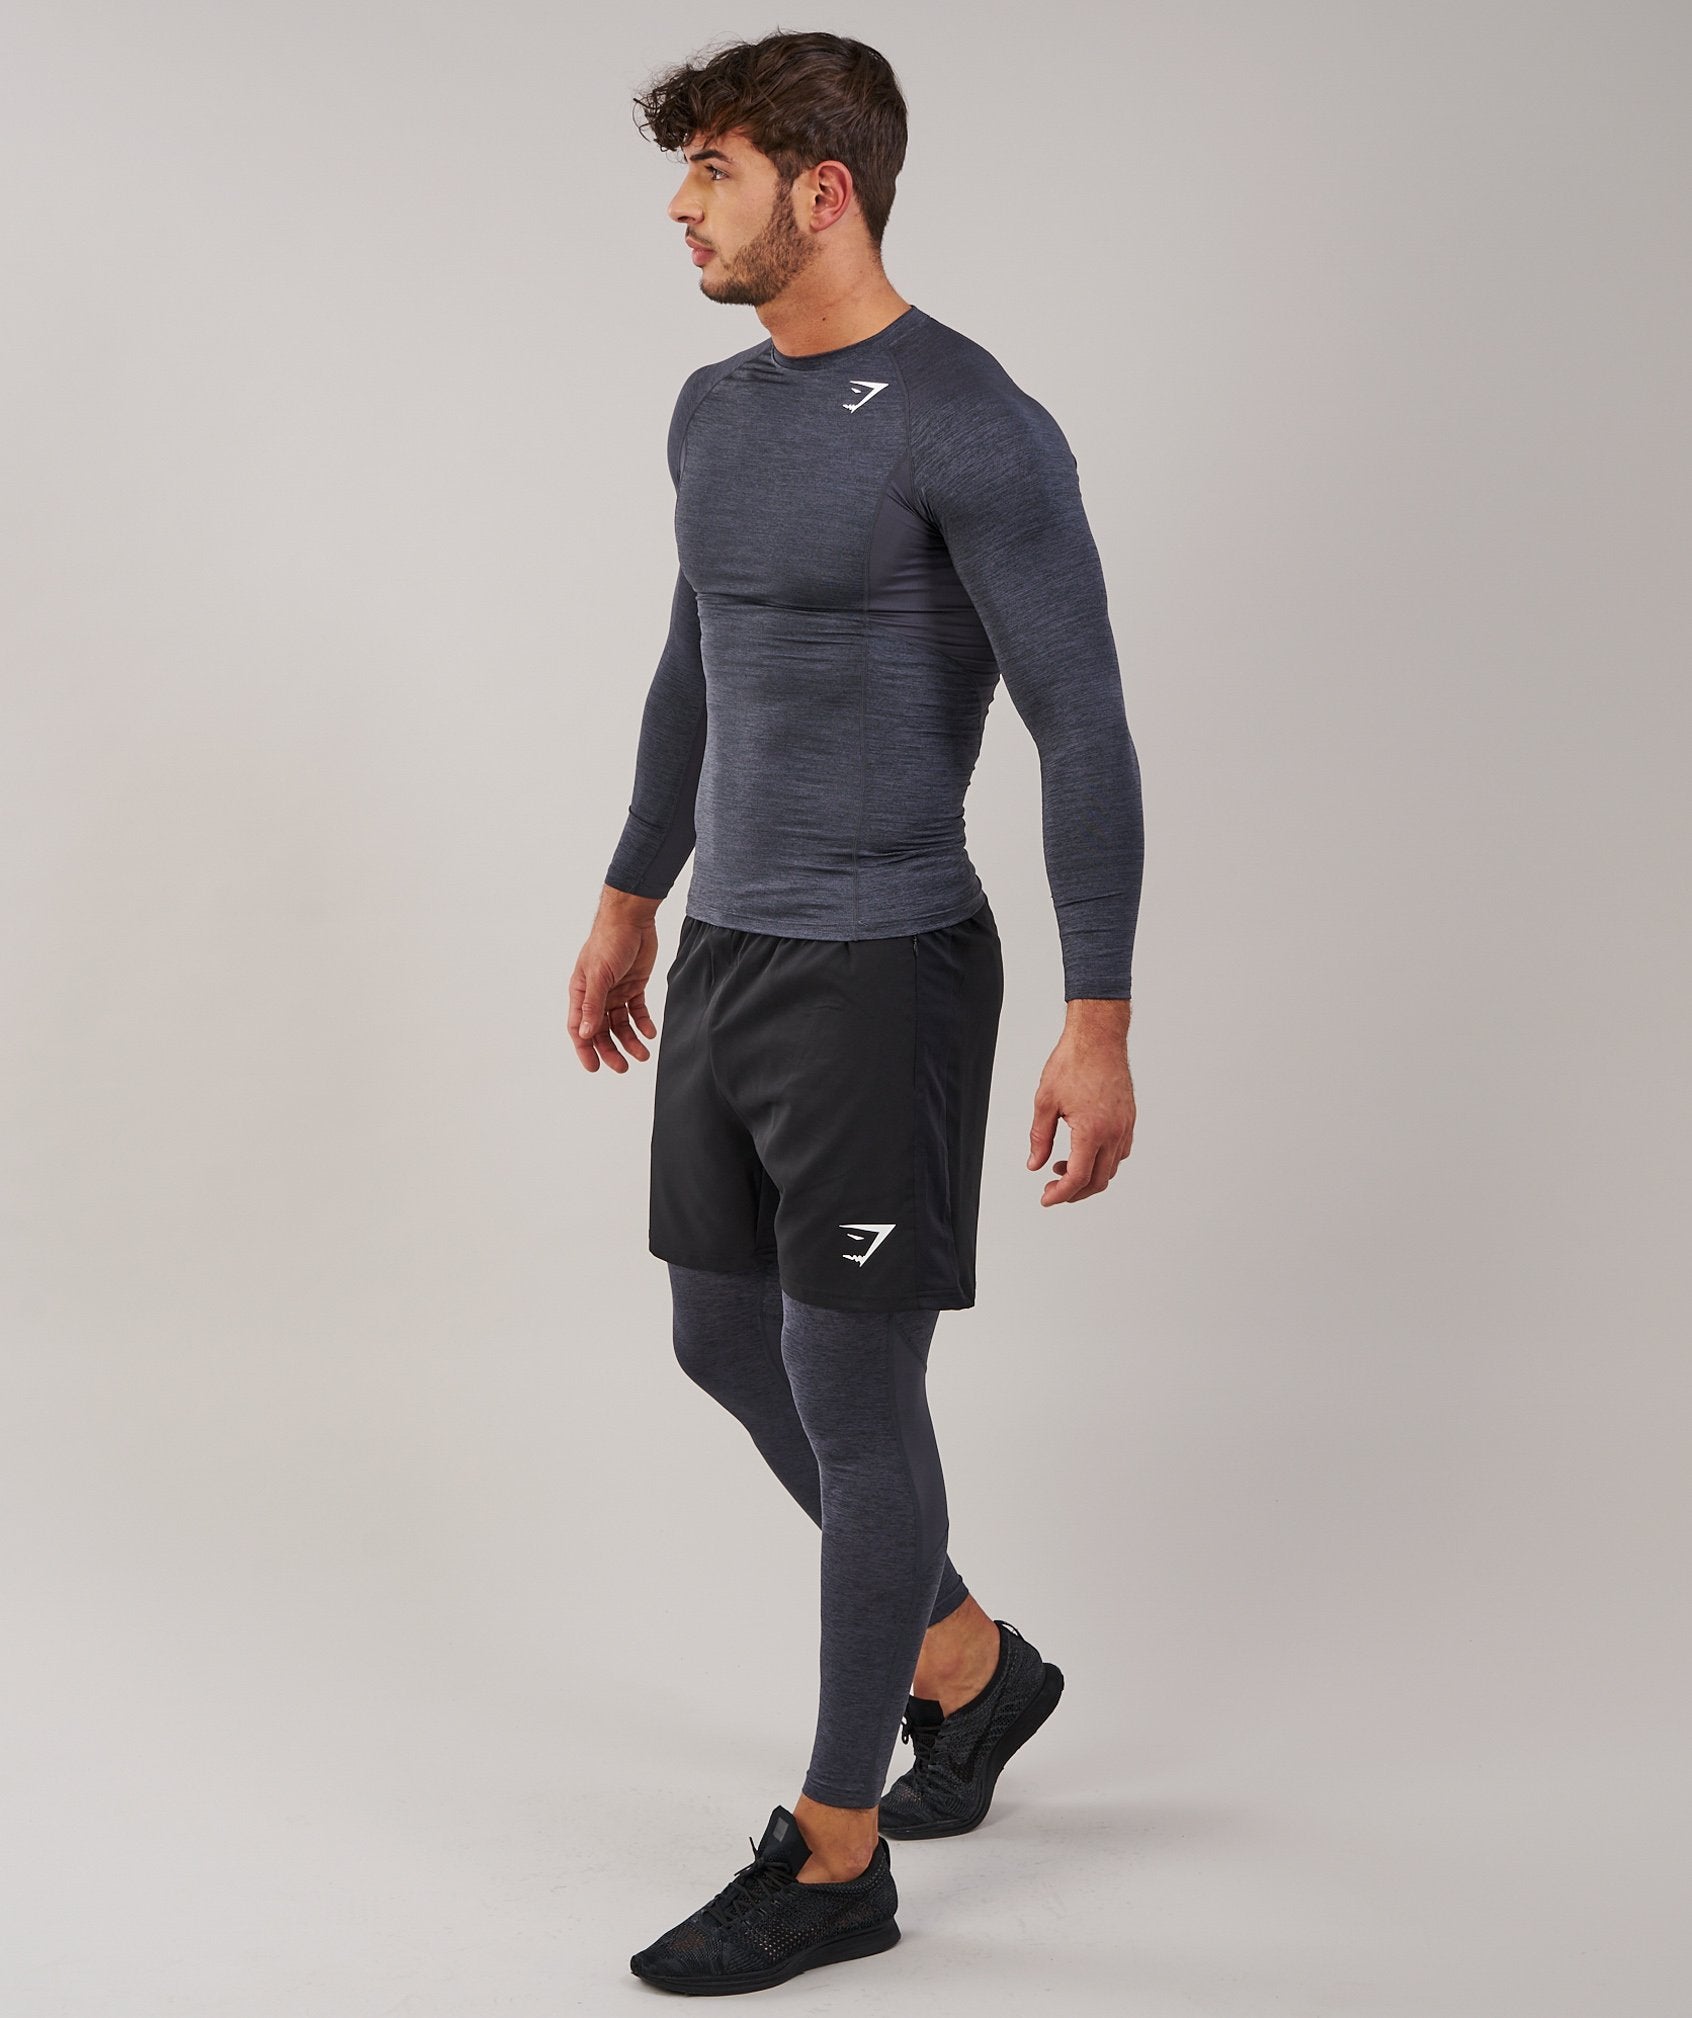 Element Baselayer Leggings in Charcoal Marl - view 4